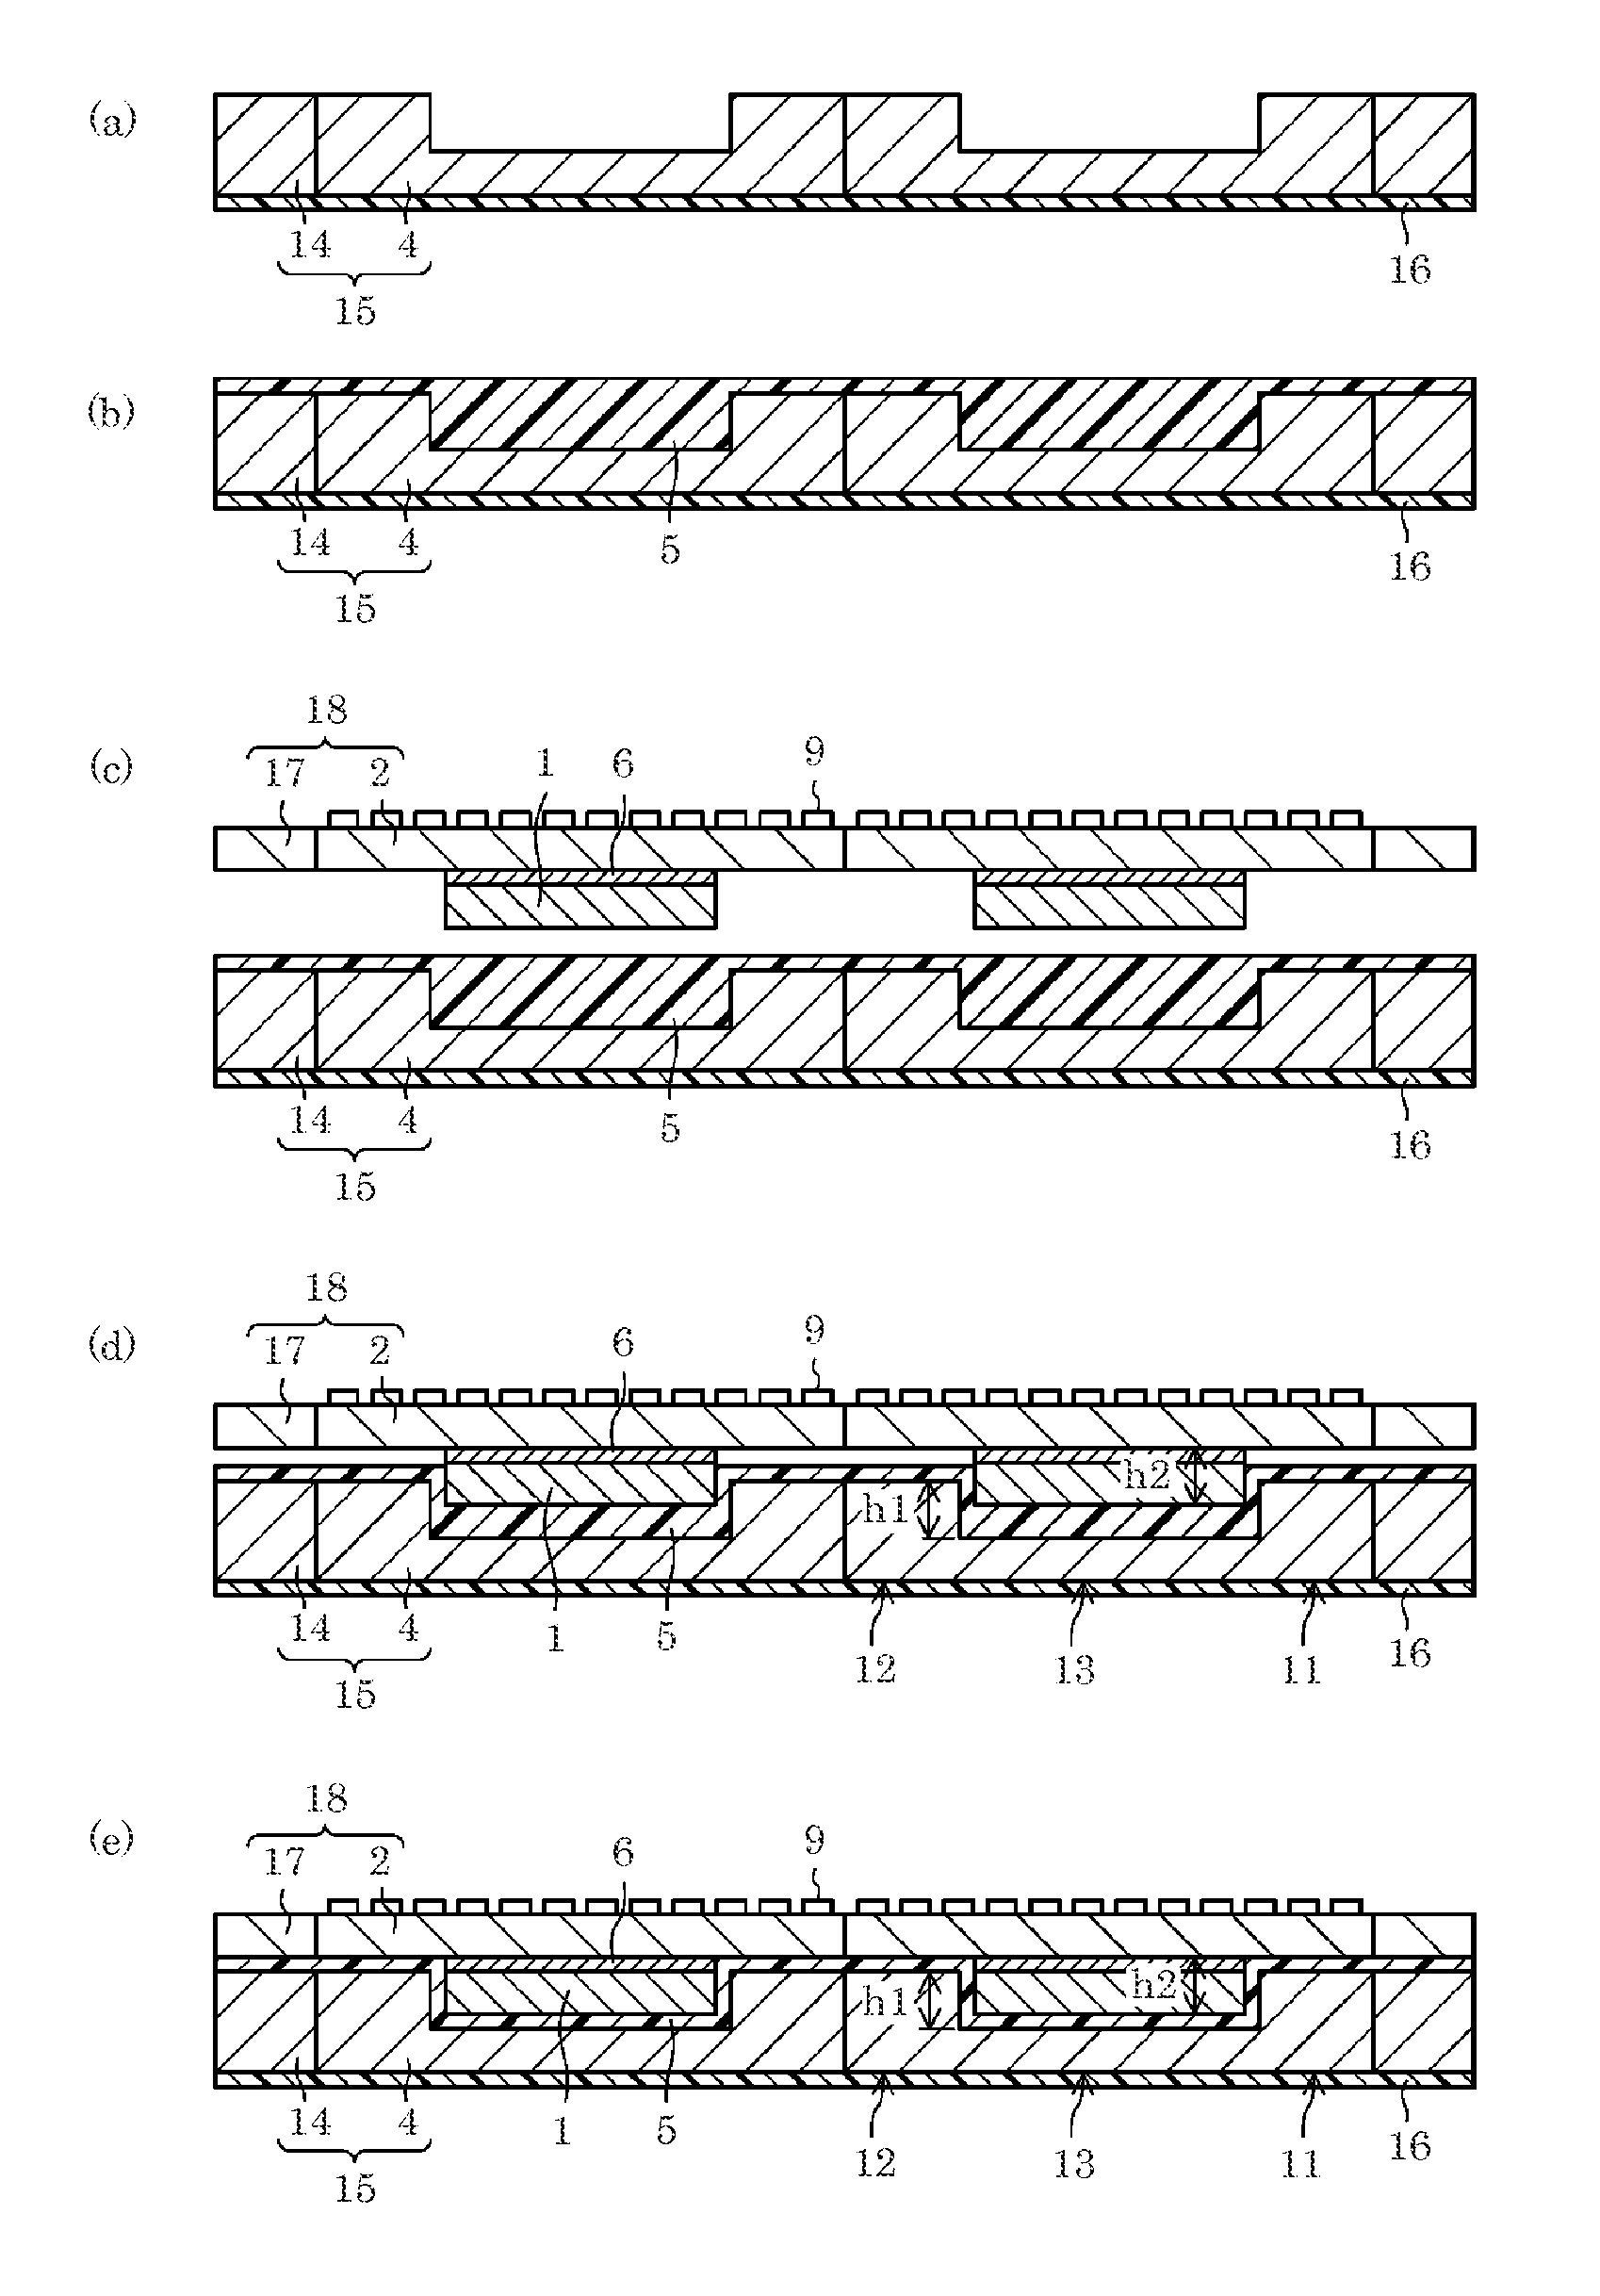 Semiconductor apparatus including a heat dissipating member